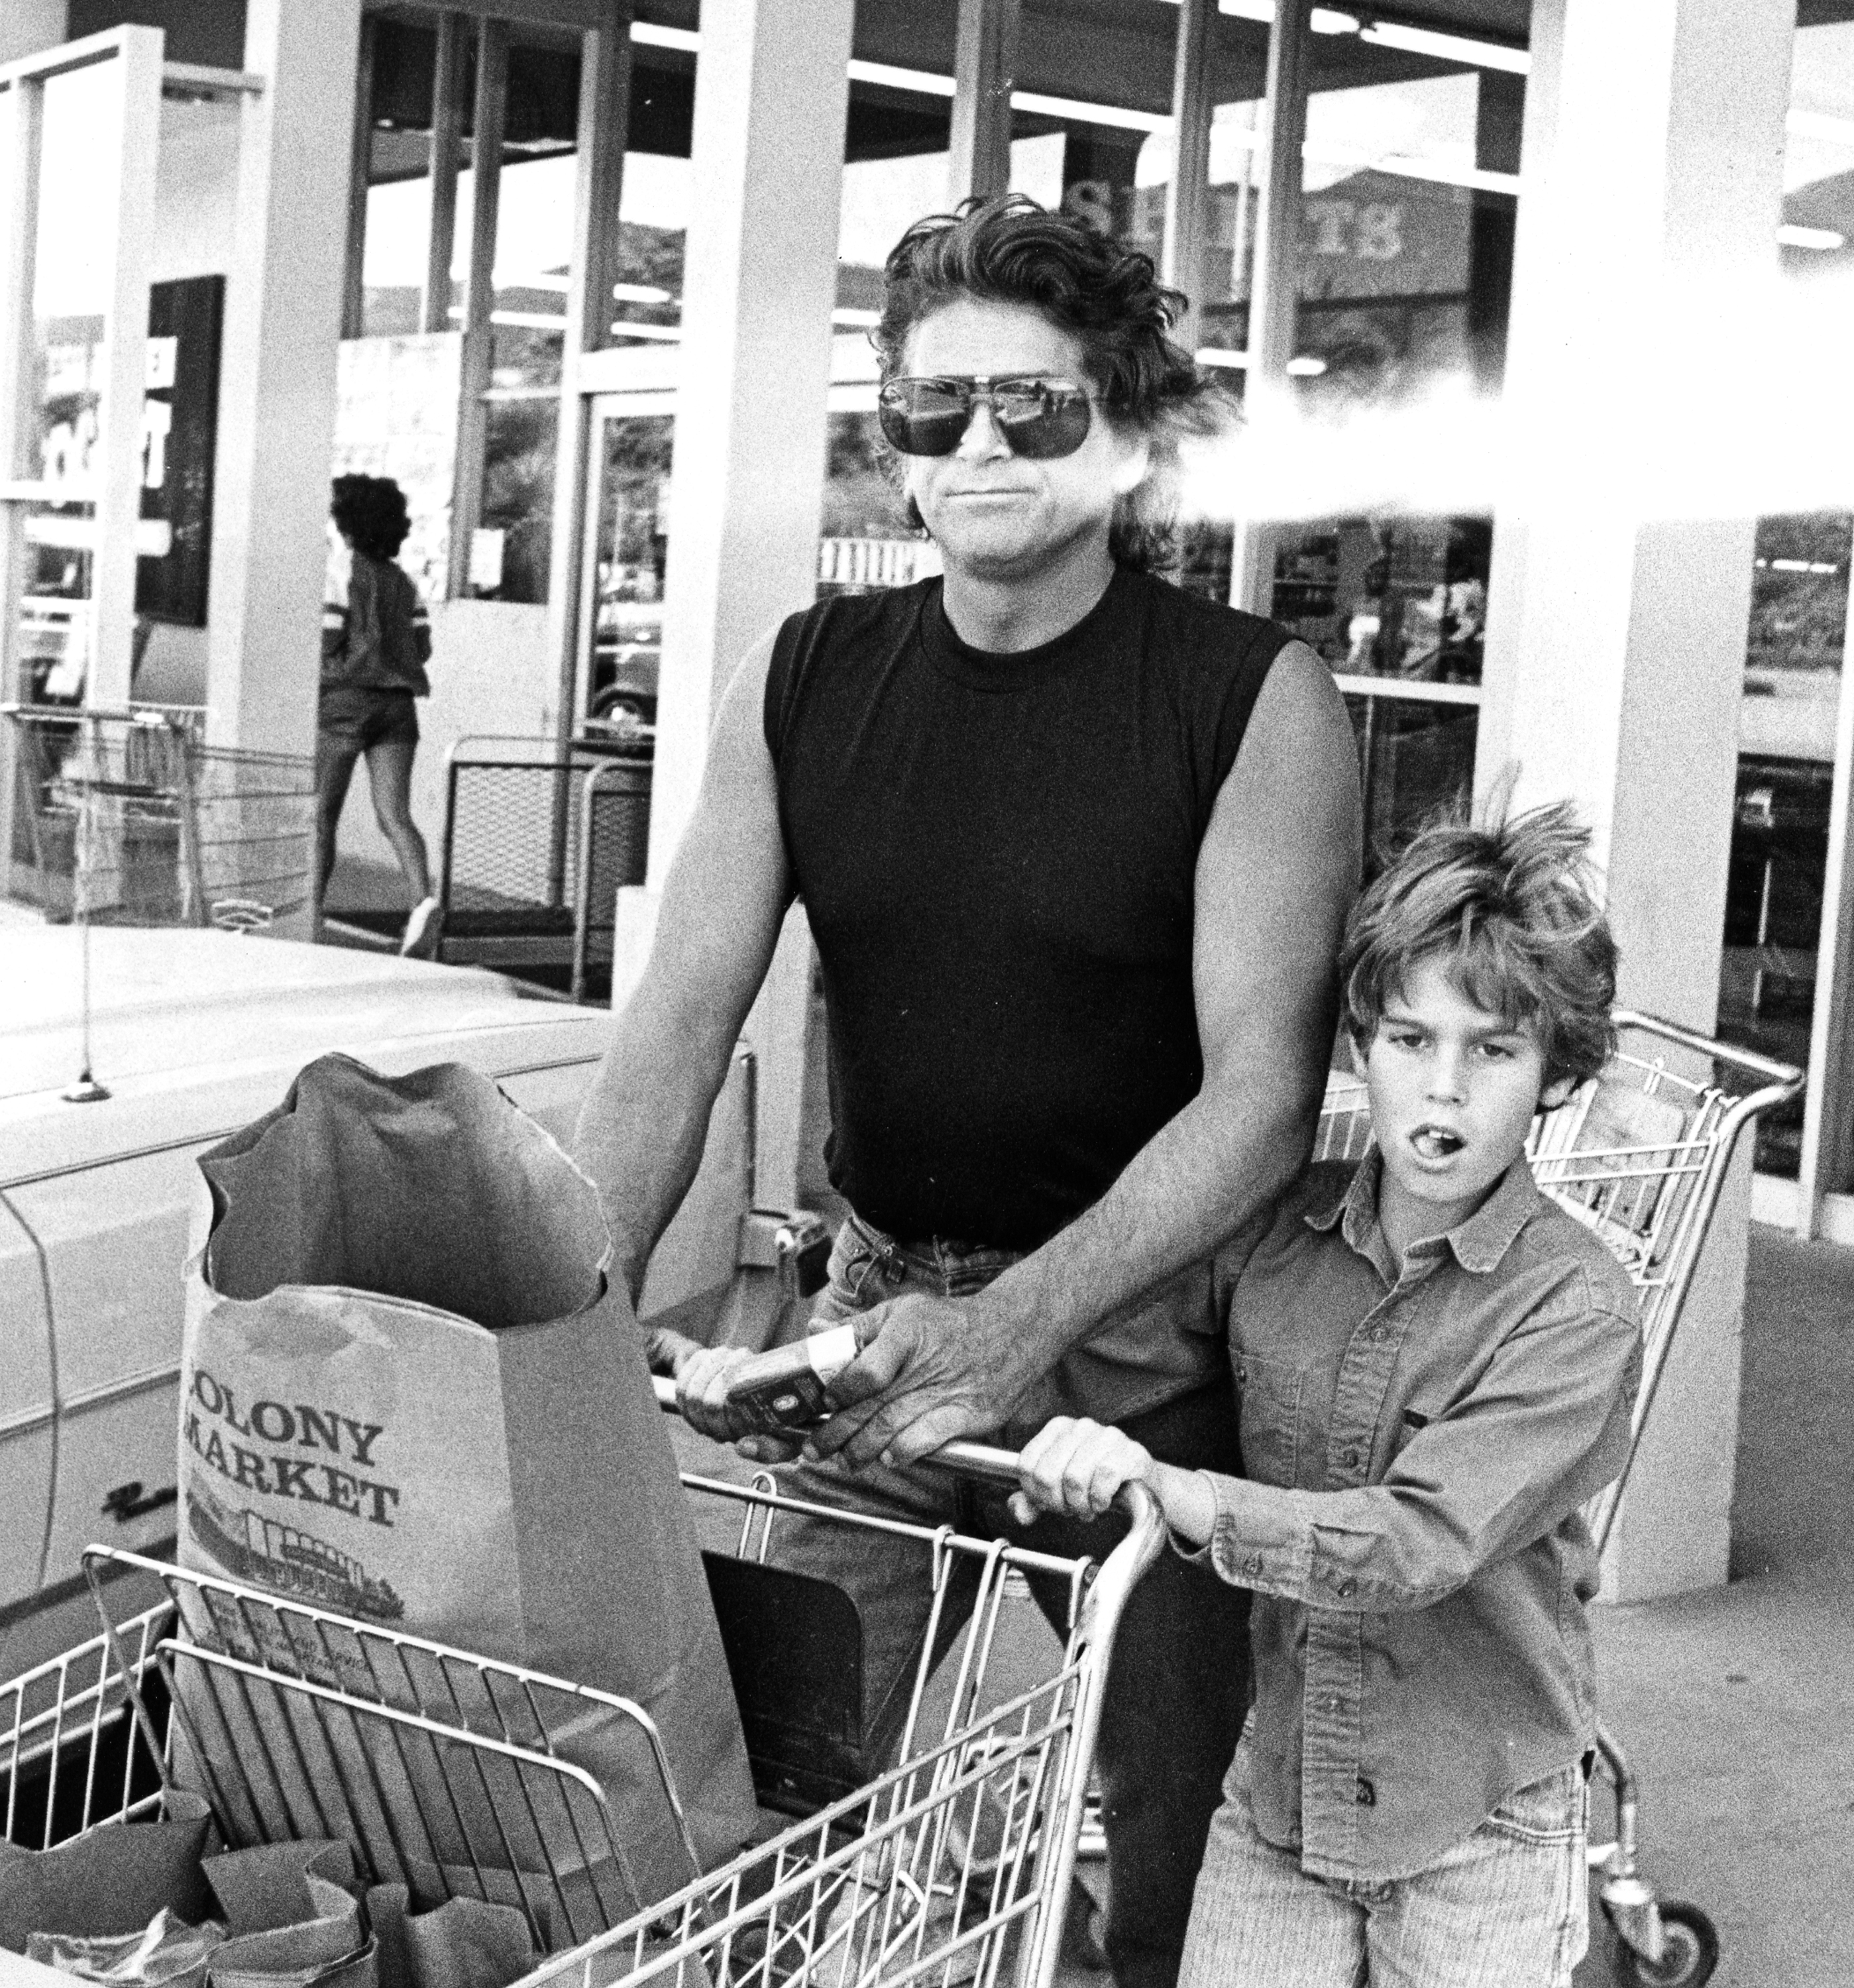 Michael and Christopher Landon at the Colony Market Food Store in Malibu, California in 1984 | Source: Getty Images